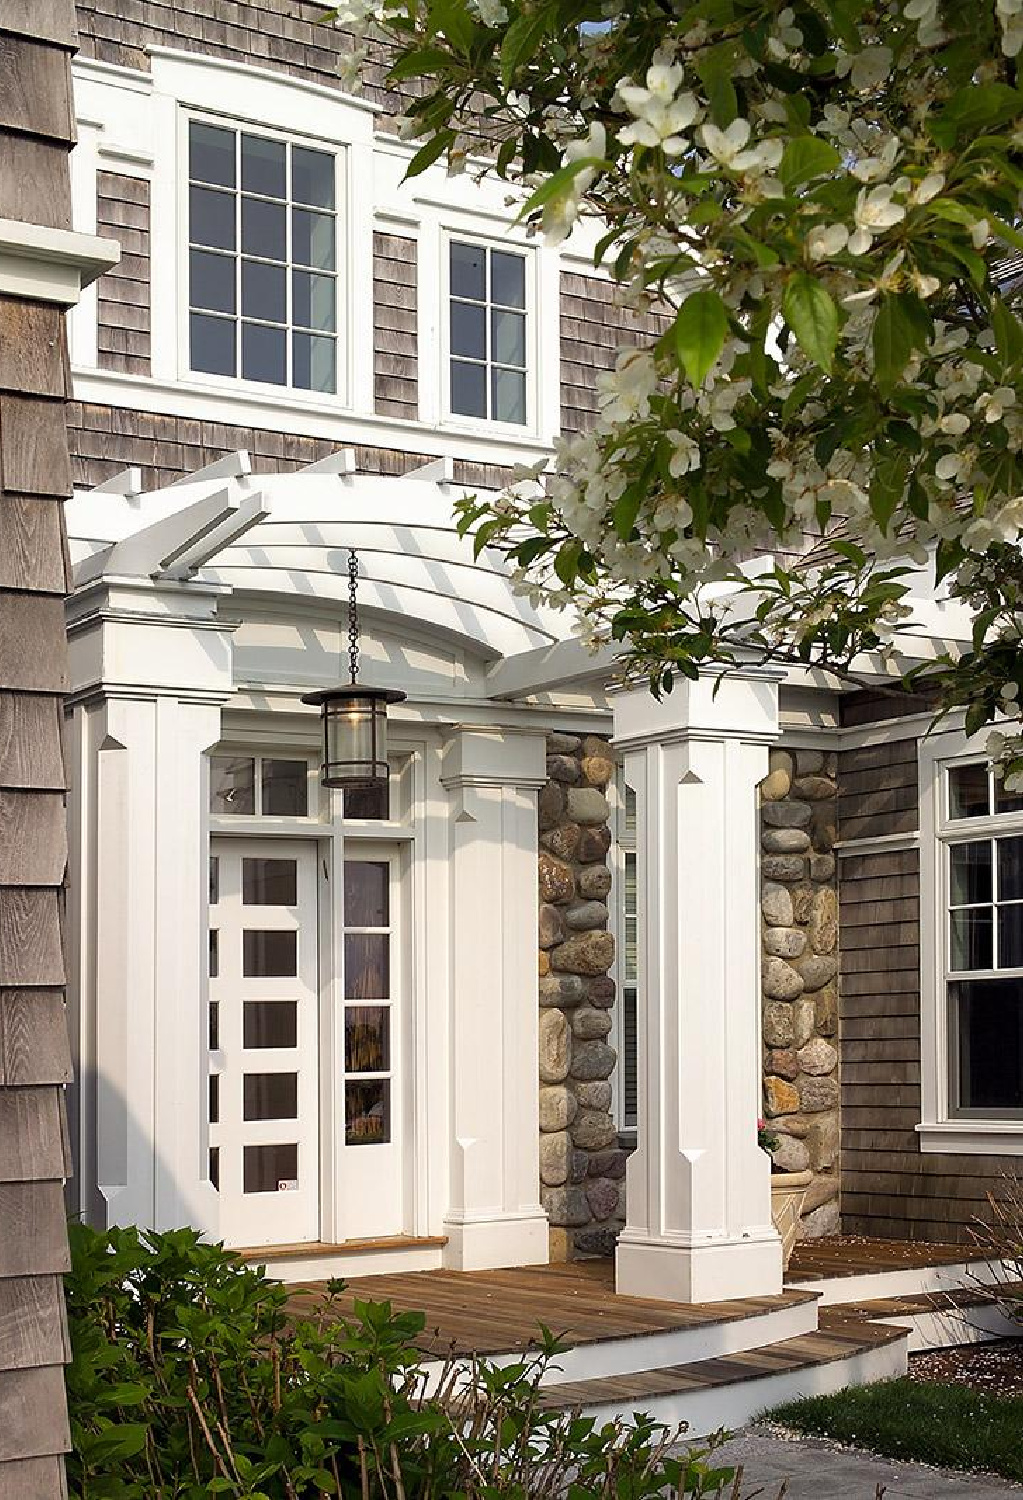 Nantucket and coastal style house architecture. COME TOUR MORE Nantucket Style Chic & Summer Vibes! #nantucket #interiordesign #designinspiration #summerliving #coastalstyle